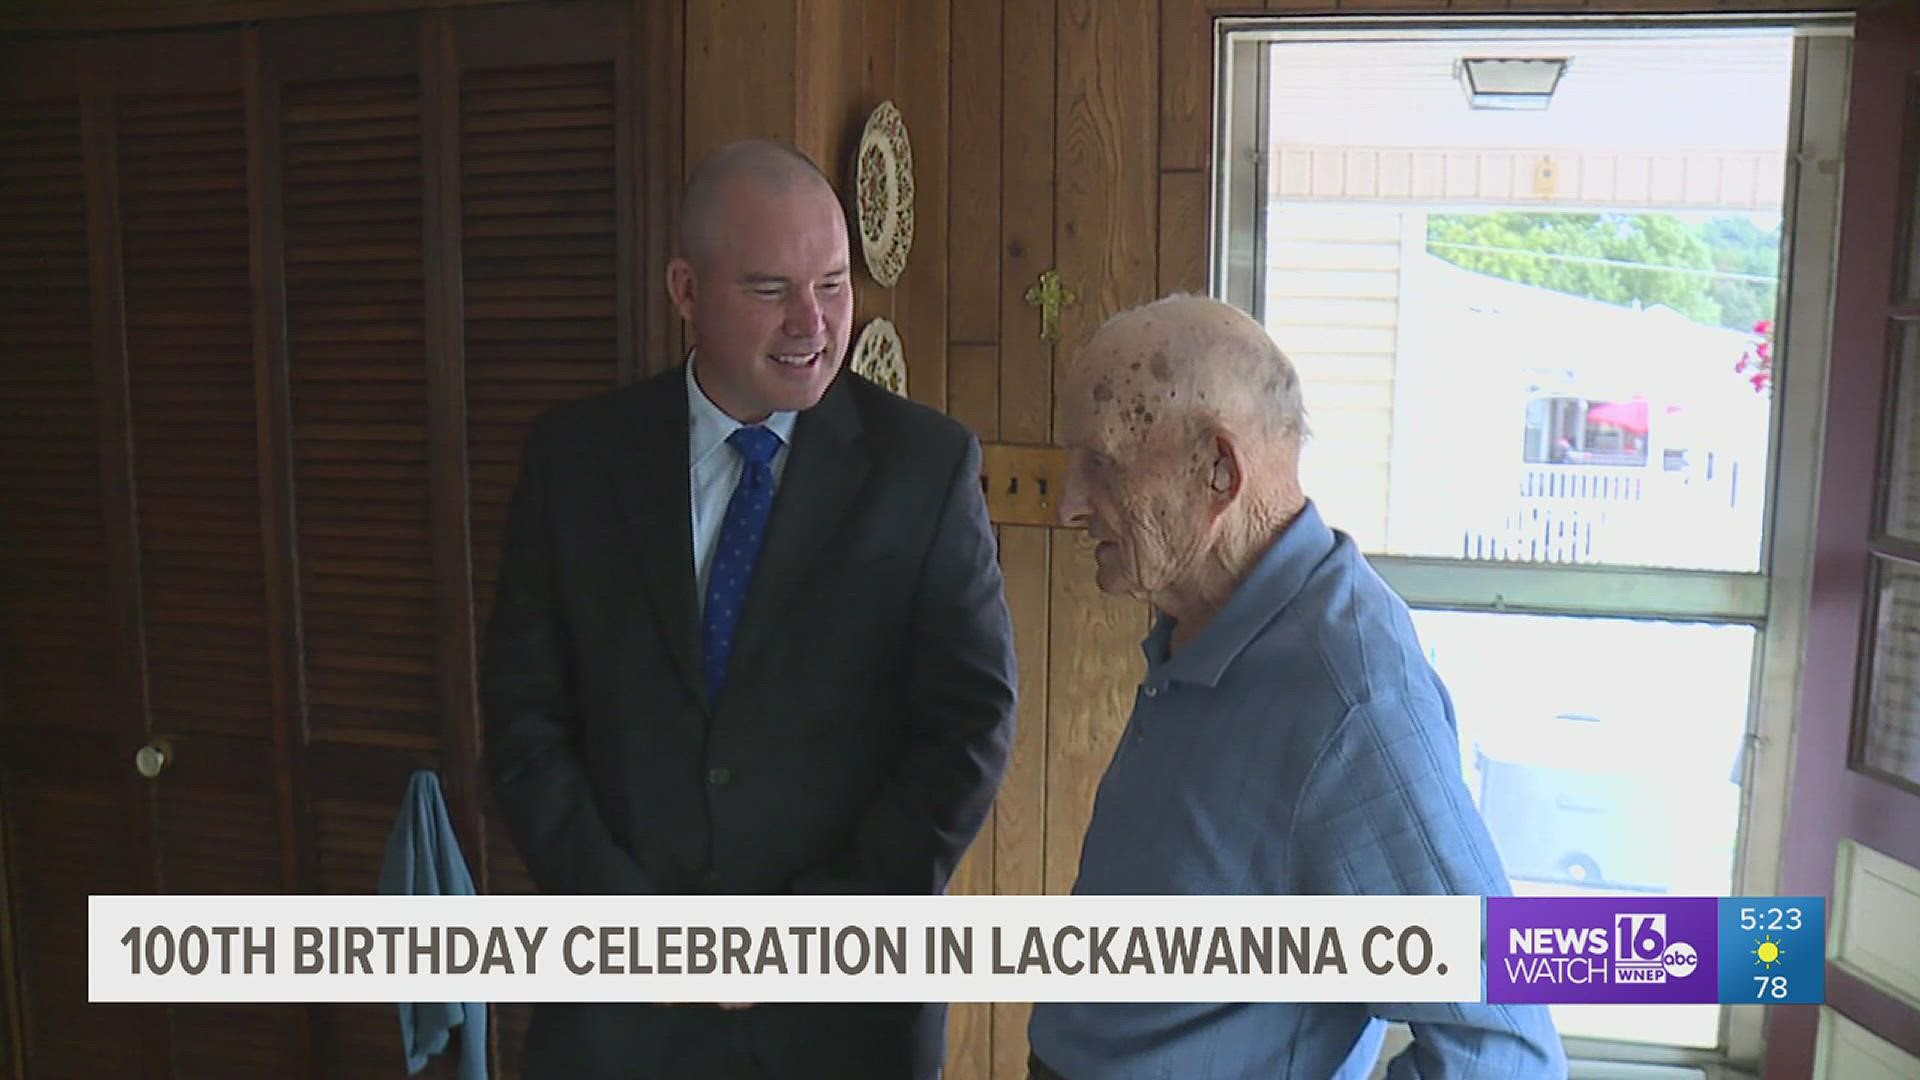 Benny Ciciloni was surrounded by friends and family at his home in Peckville for his 100th birthday.